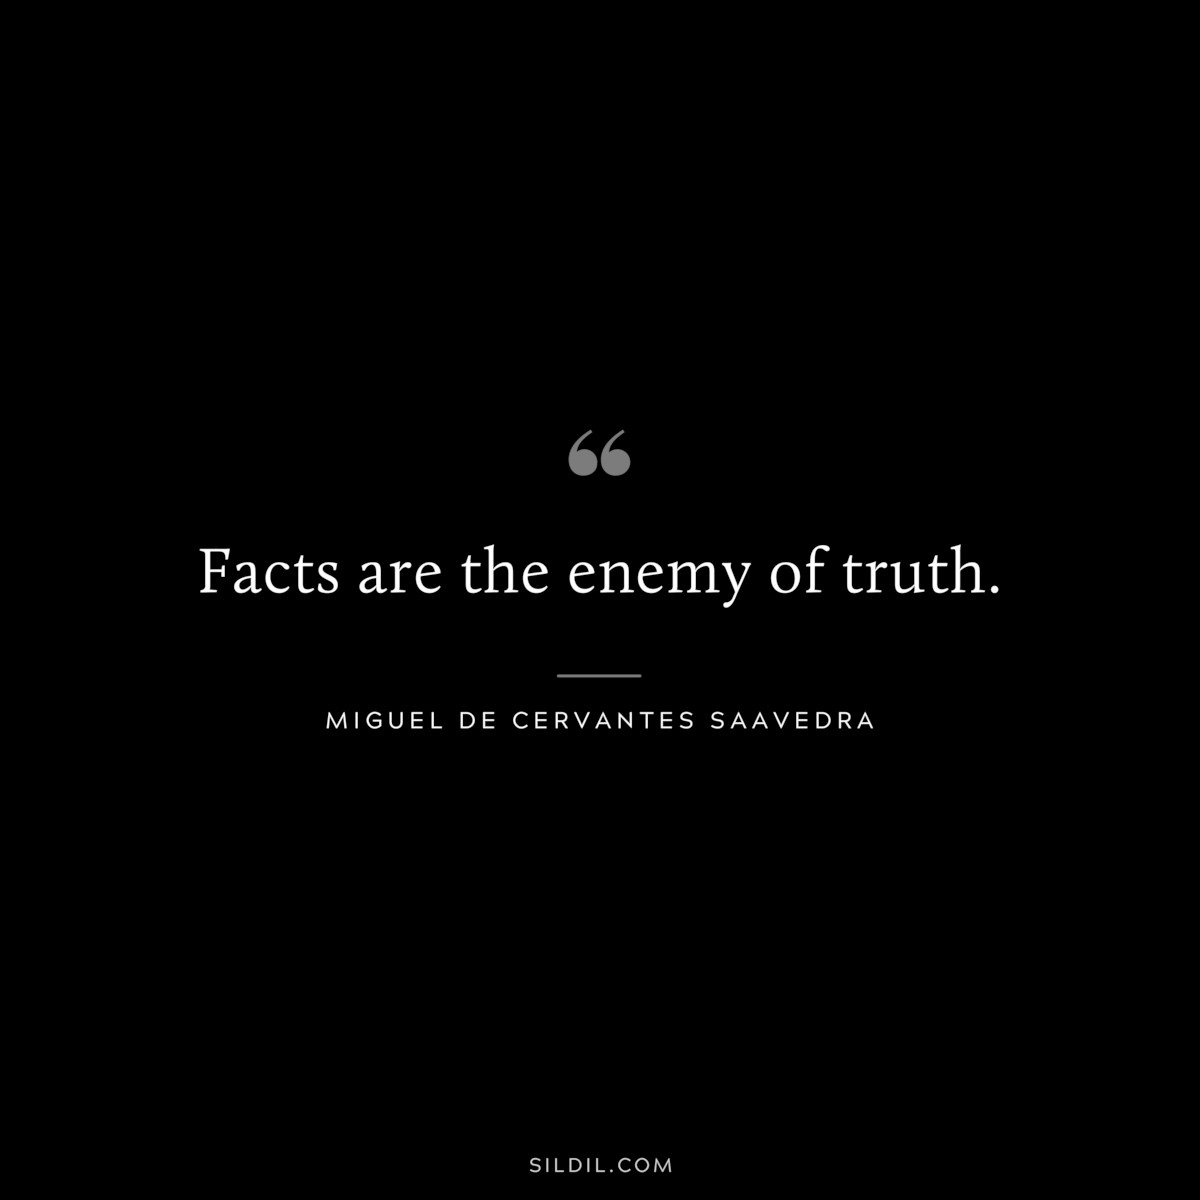 Facts are the enemy of truth. ― Miguel de Cervantes Saavedra